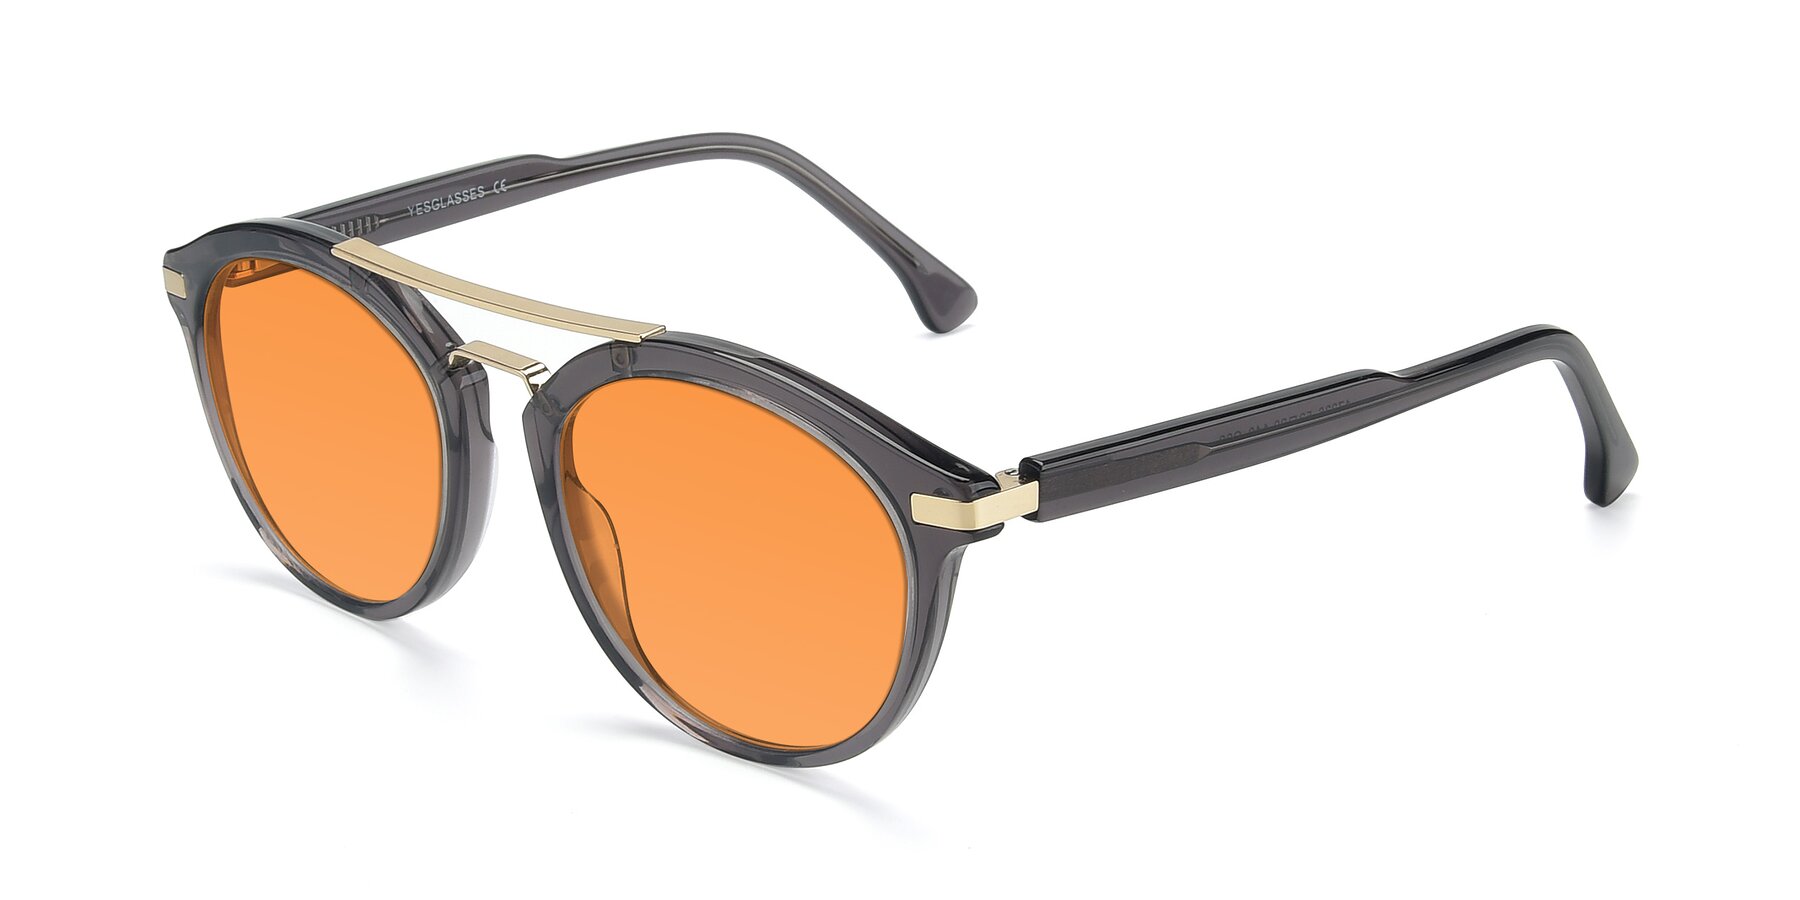 Angle of 17236 in Gray-Gold with Orange Tinted Lenses